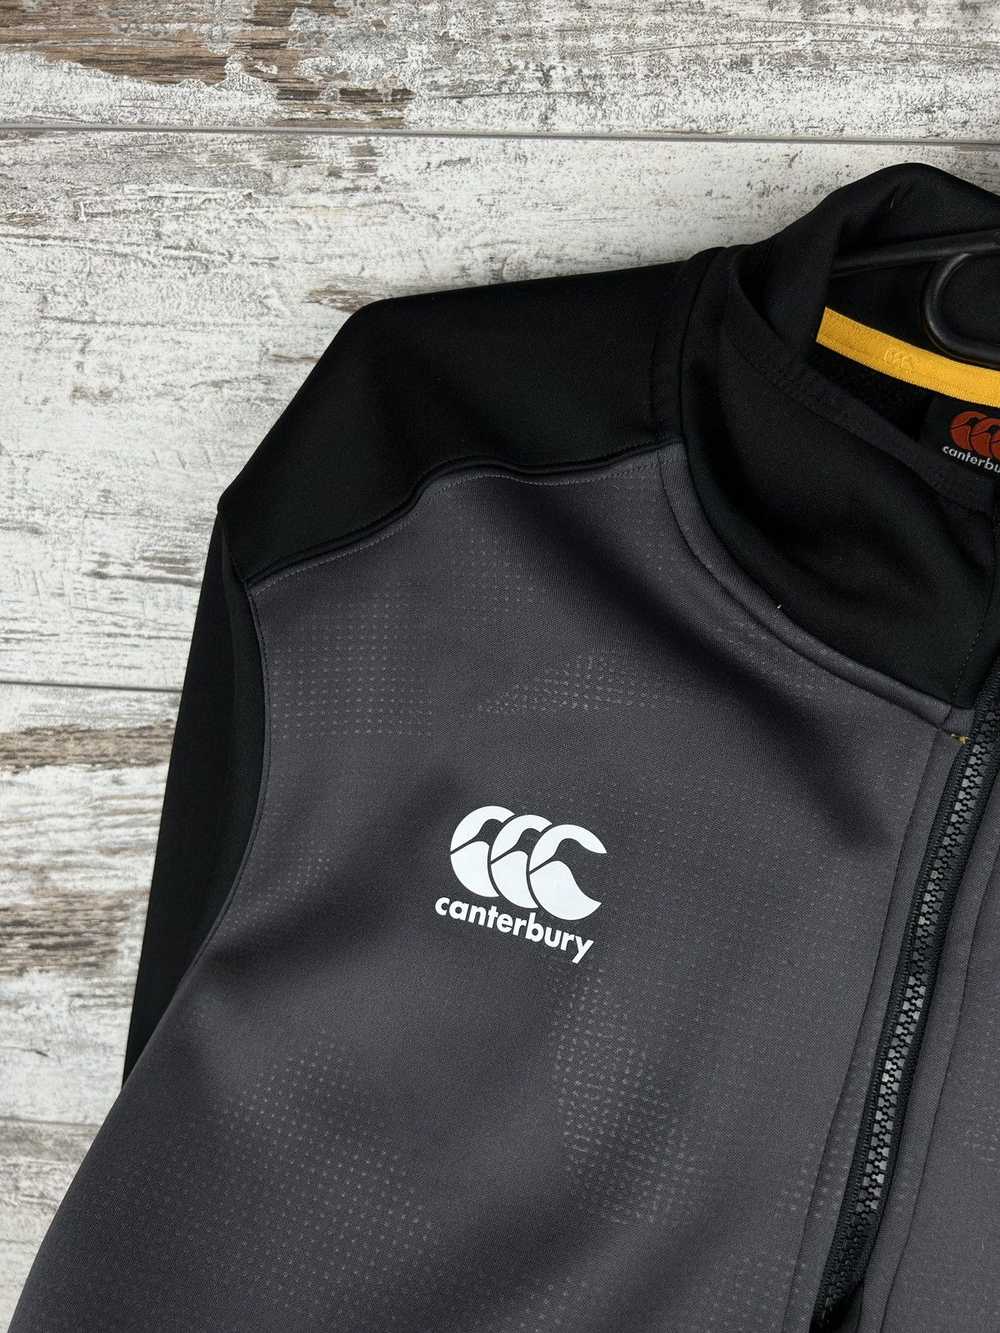 Canterbury Of New Zealand × England Rugby League … - image 9